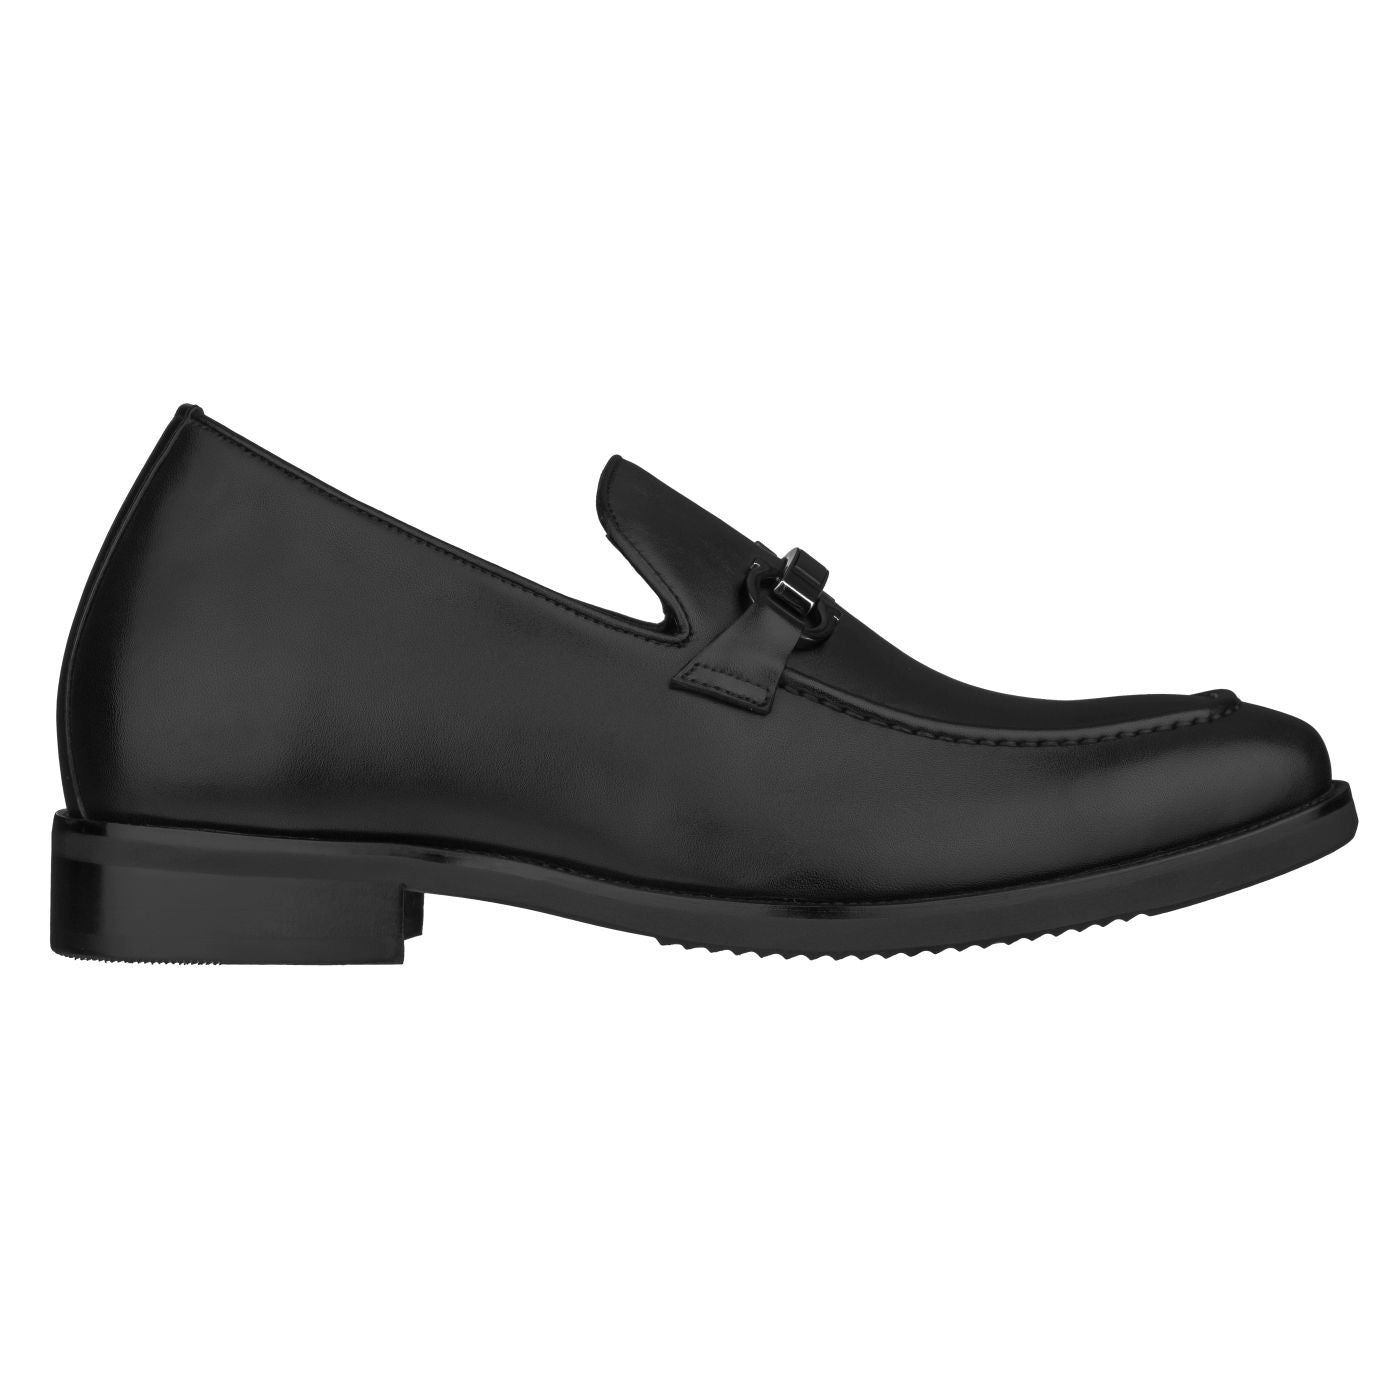 Elevator shoes height increase CALTO - S2110 - 3.0 Inches Taller (Black)